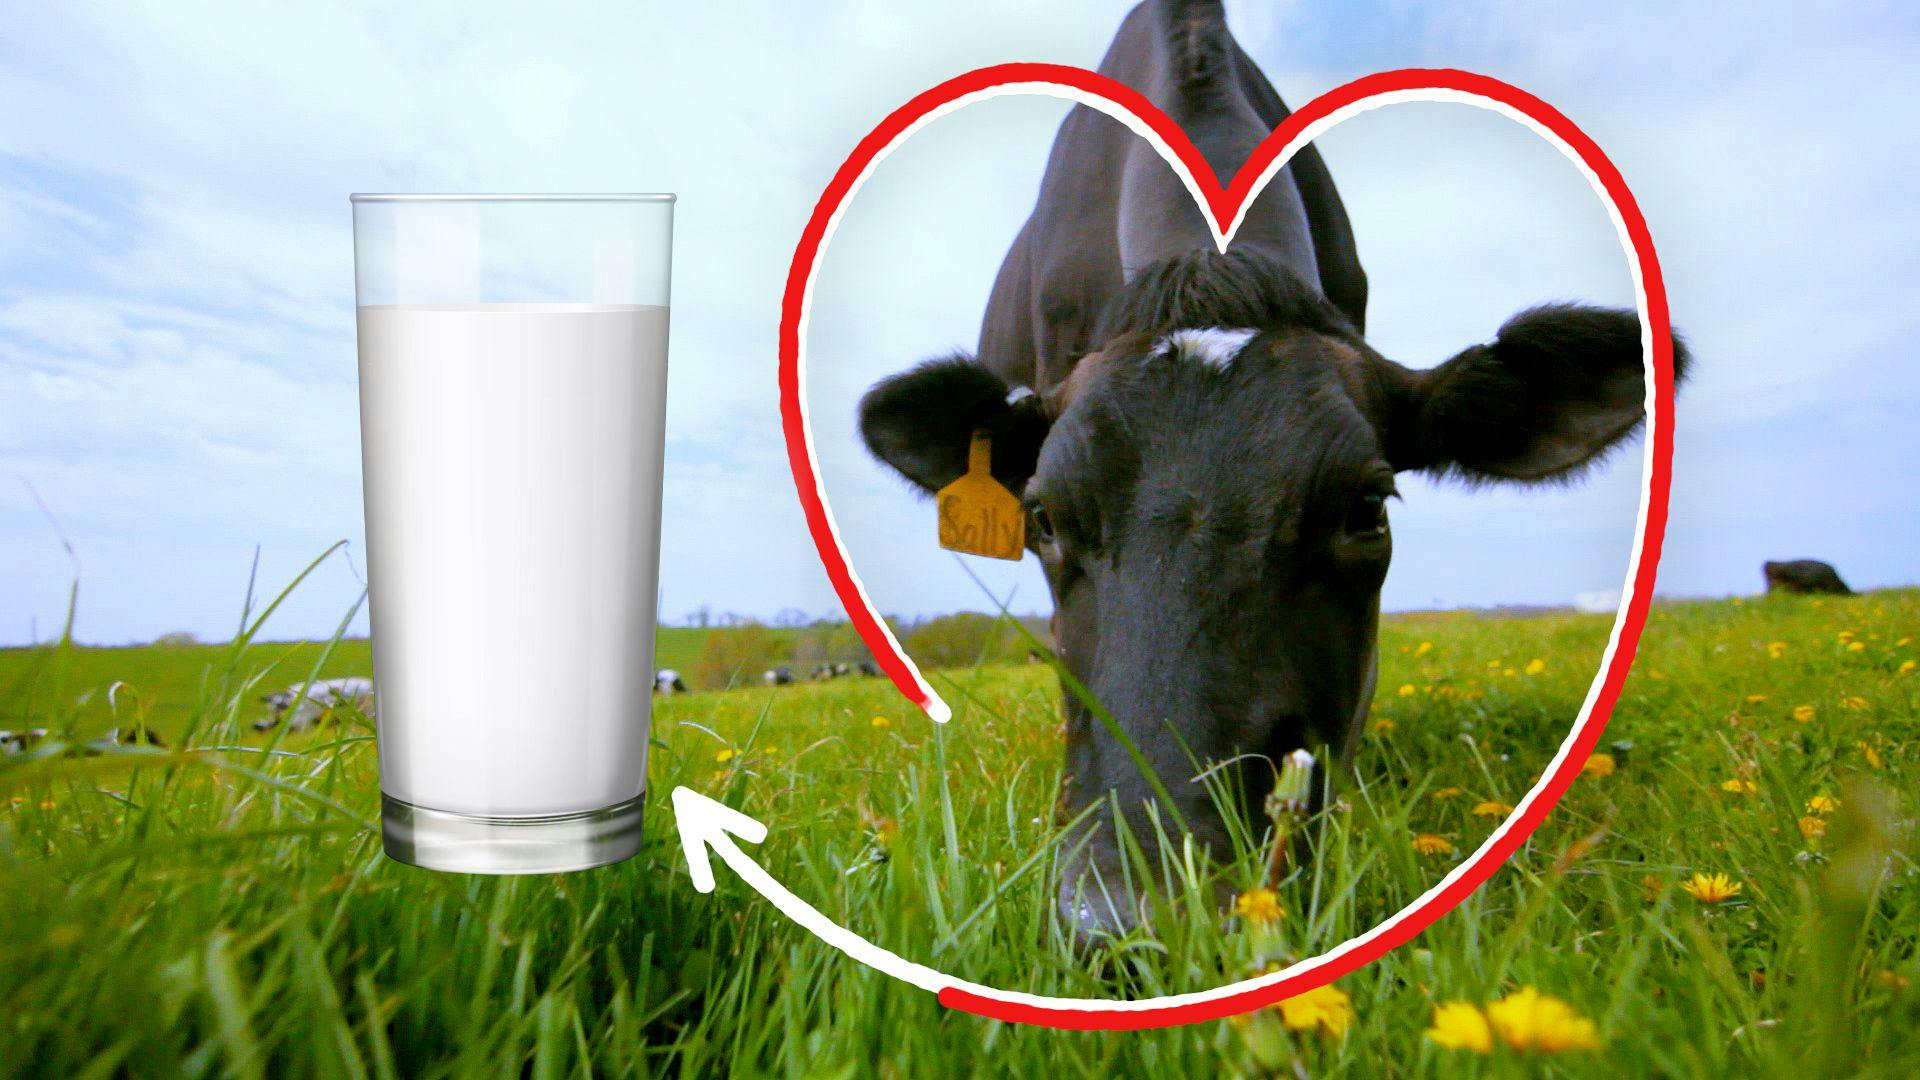 Heart circles an organic cow eating grass in a pasture and a glass of milk is overlaid.